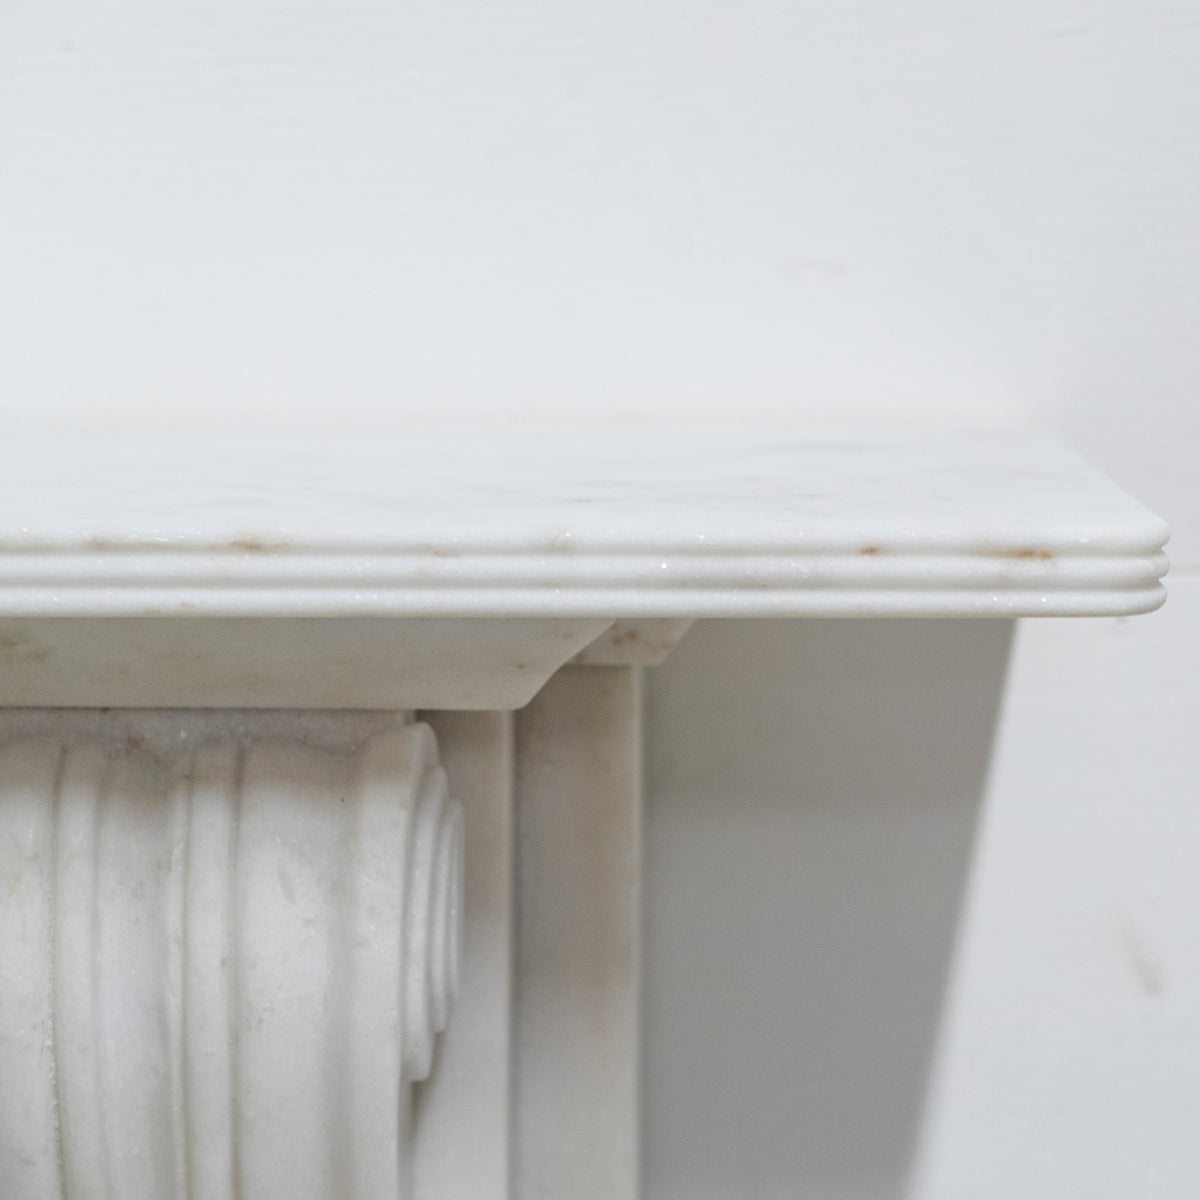 Reclaimed Statuary Marble Victorian Style Chimneypiece with Corbels | The Architectural Forum